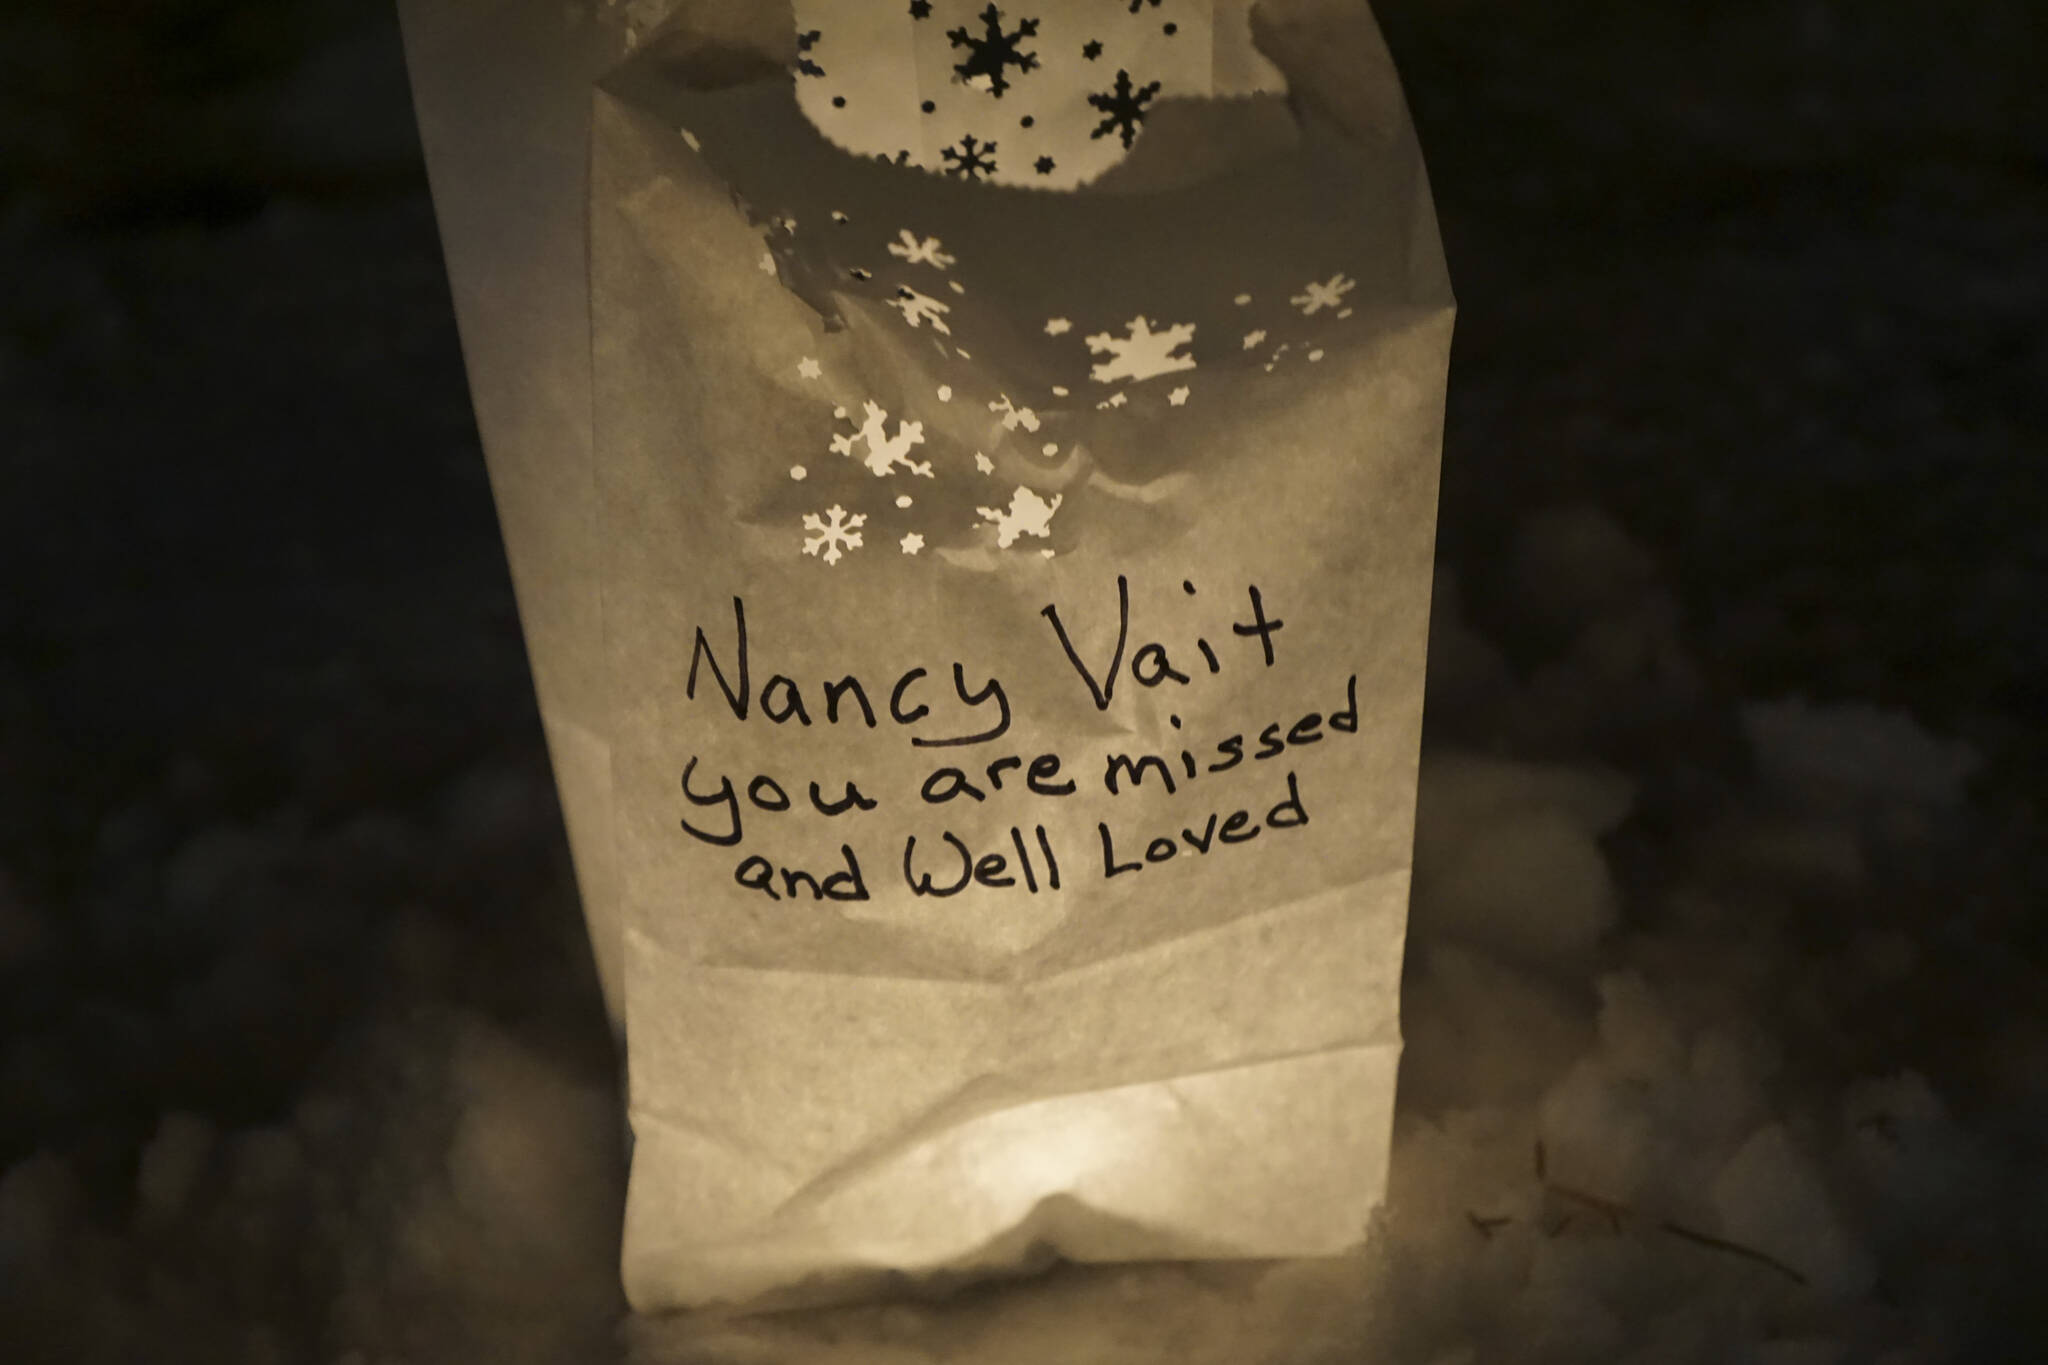 A luminaria in honor of Nancy Vait, who died on Setp. 21, 2022, was one of the lanterns put up at Light Up a Life, a fundraiser for Hospice of Homer, on Thursday, Dec. 15, 2022, at WKFL Park in Homer, Alaska. (Photo by Michael Armstrong/Homer News)